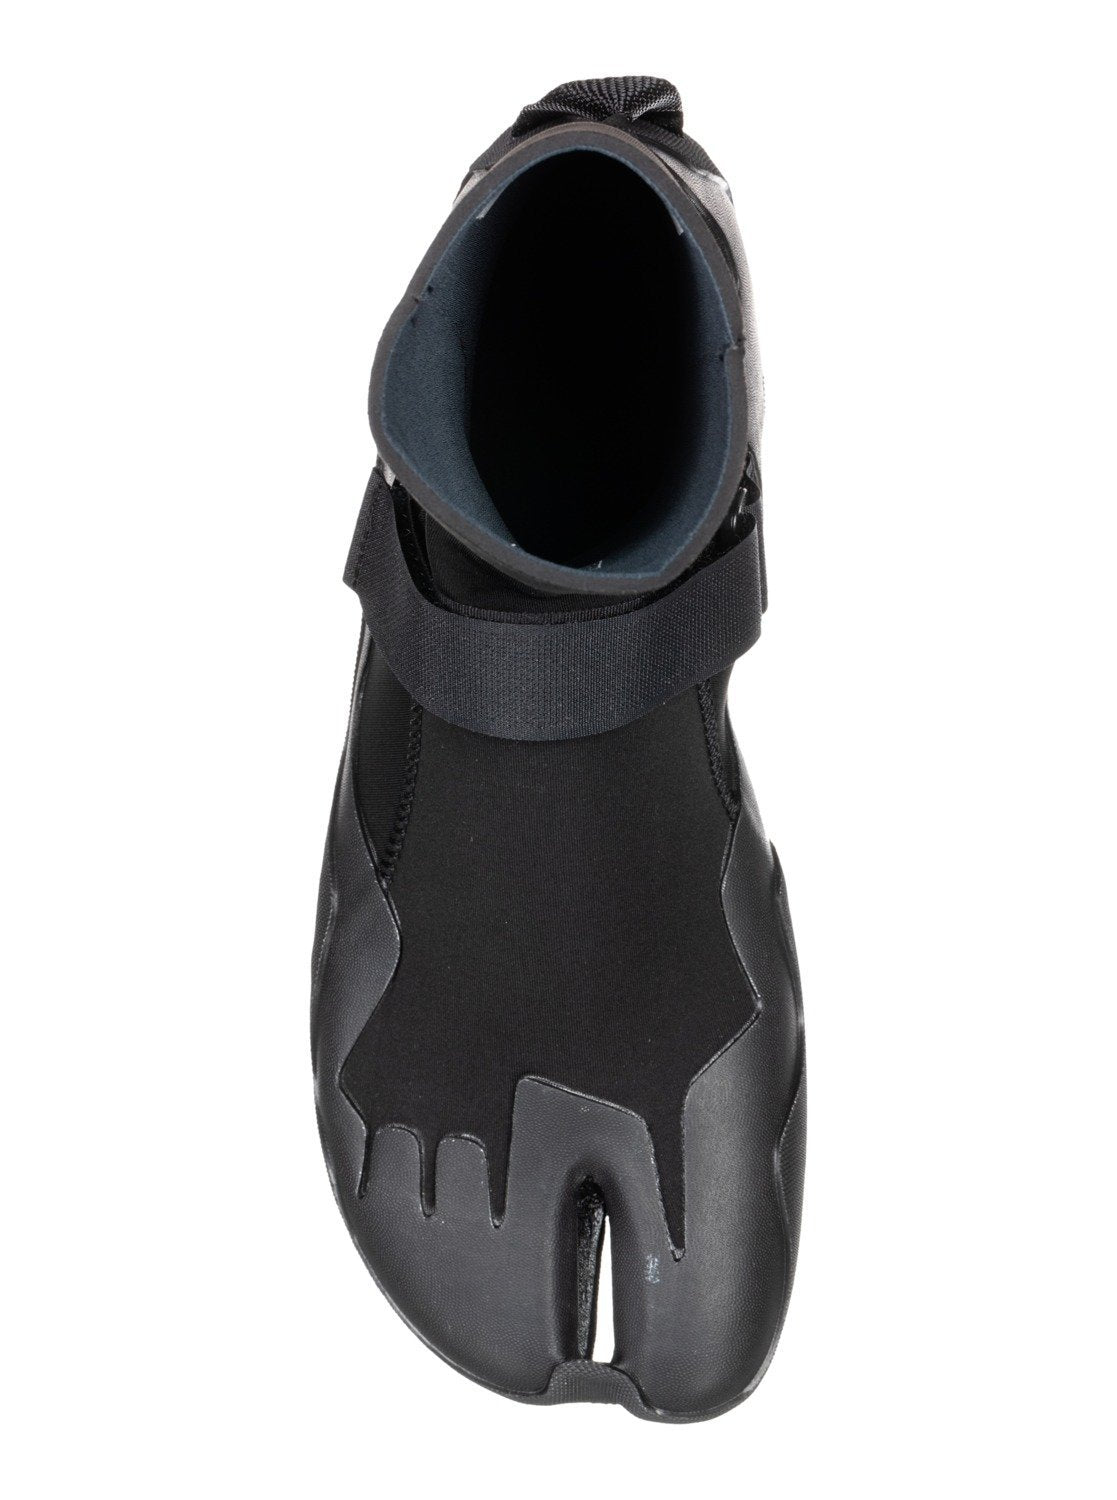 Quiksilver 3mm Everyday Sessions - Wetsuit Boots for Men